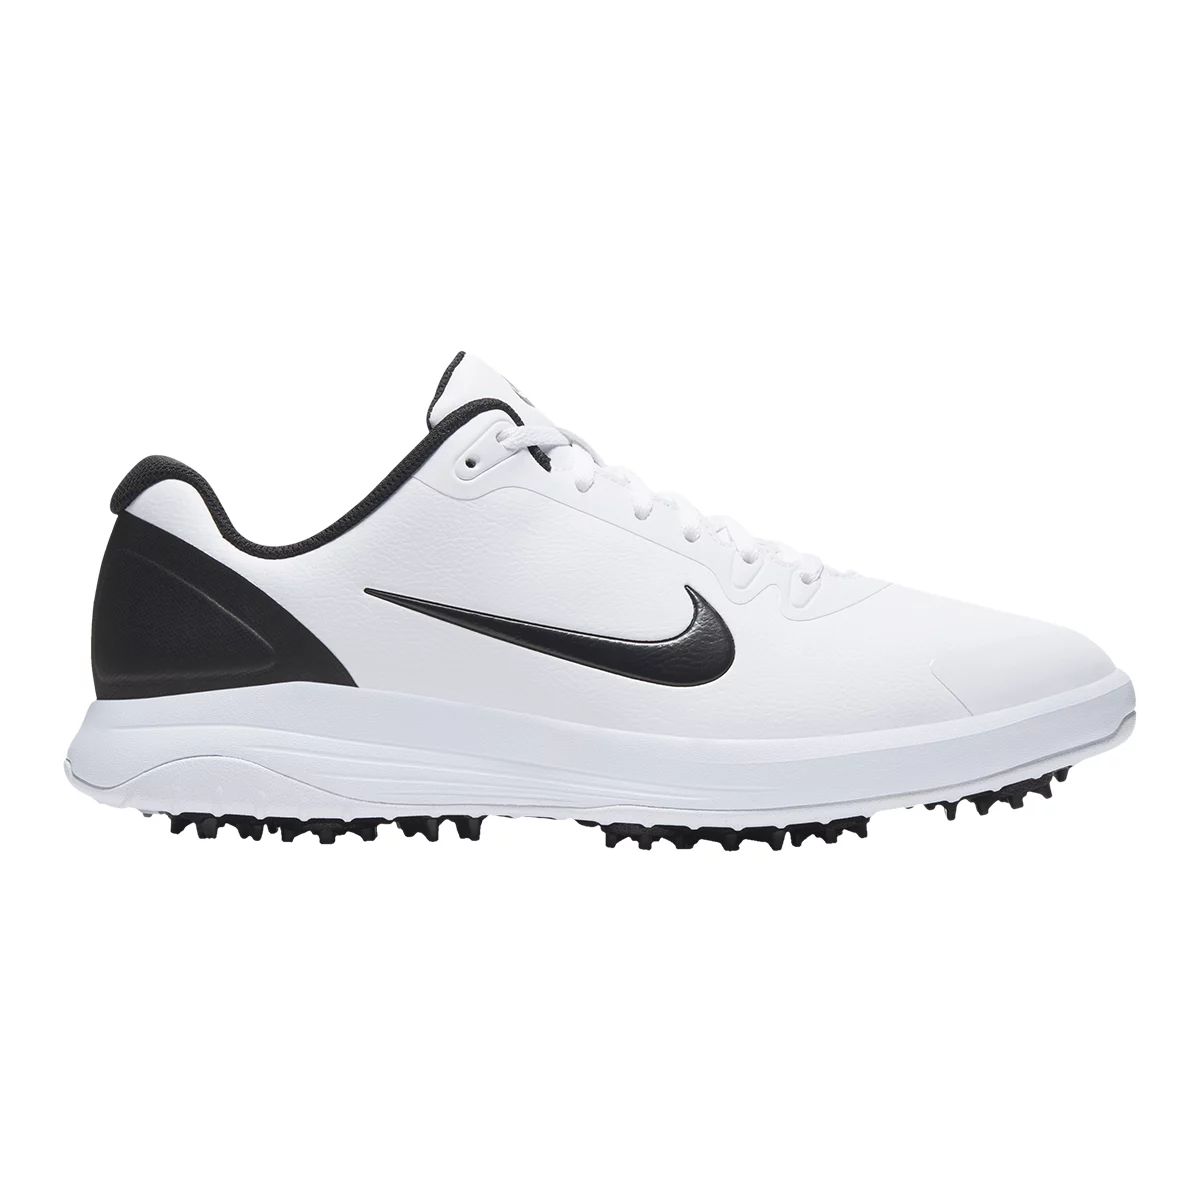 Nike Men's Infinity G Golf Shoes, Spiked, Leather, Waterproof